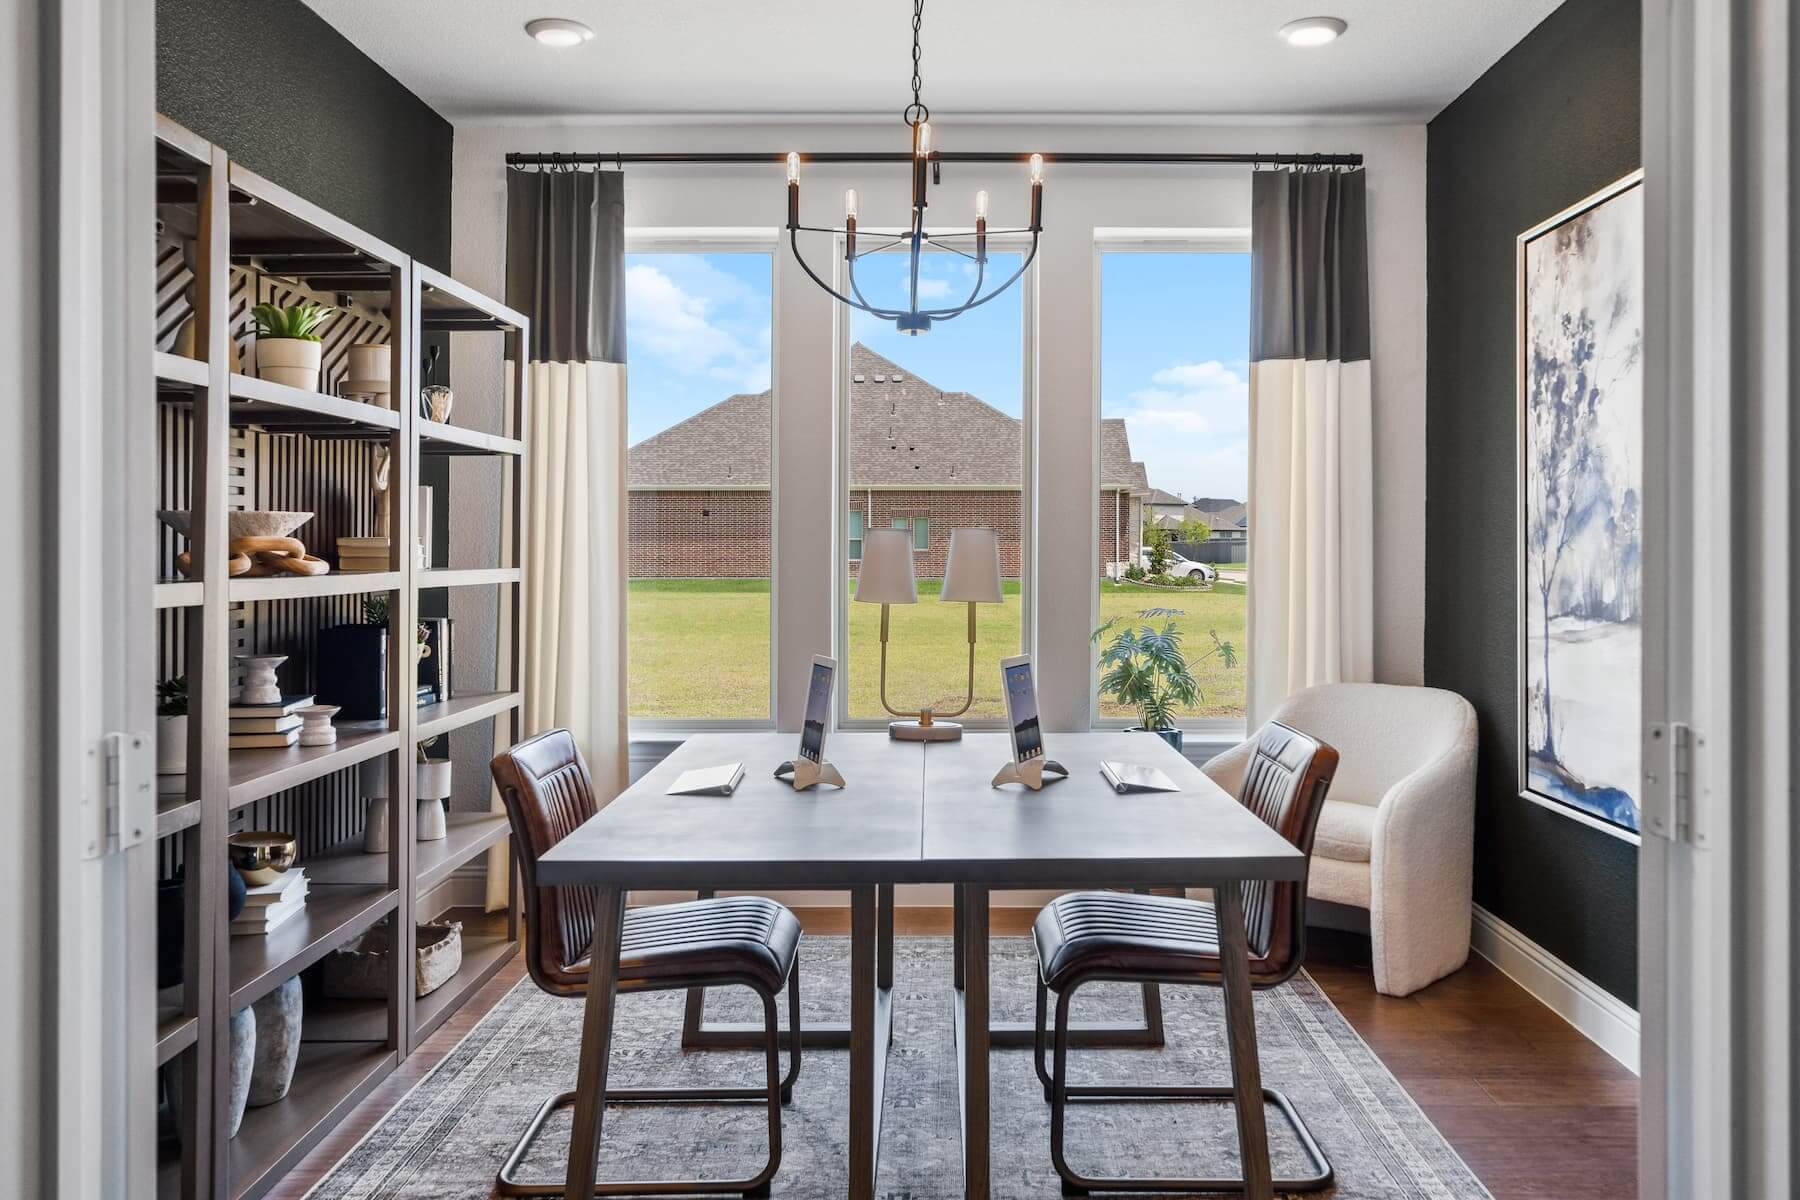 Modern dining room with a wooden table, upholstered chairs, and a view of the backyard in new homes in Mansfield TX.